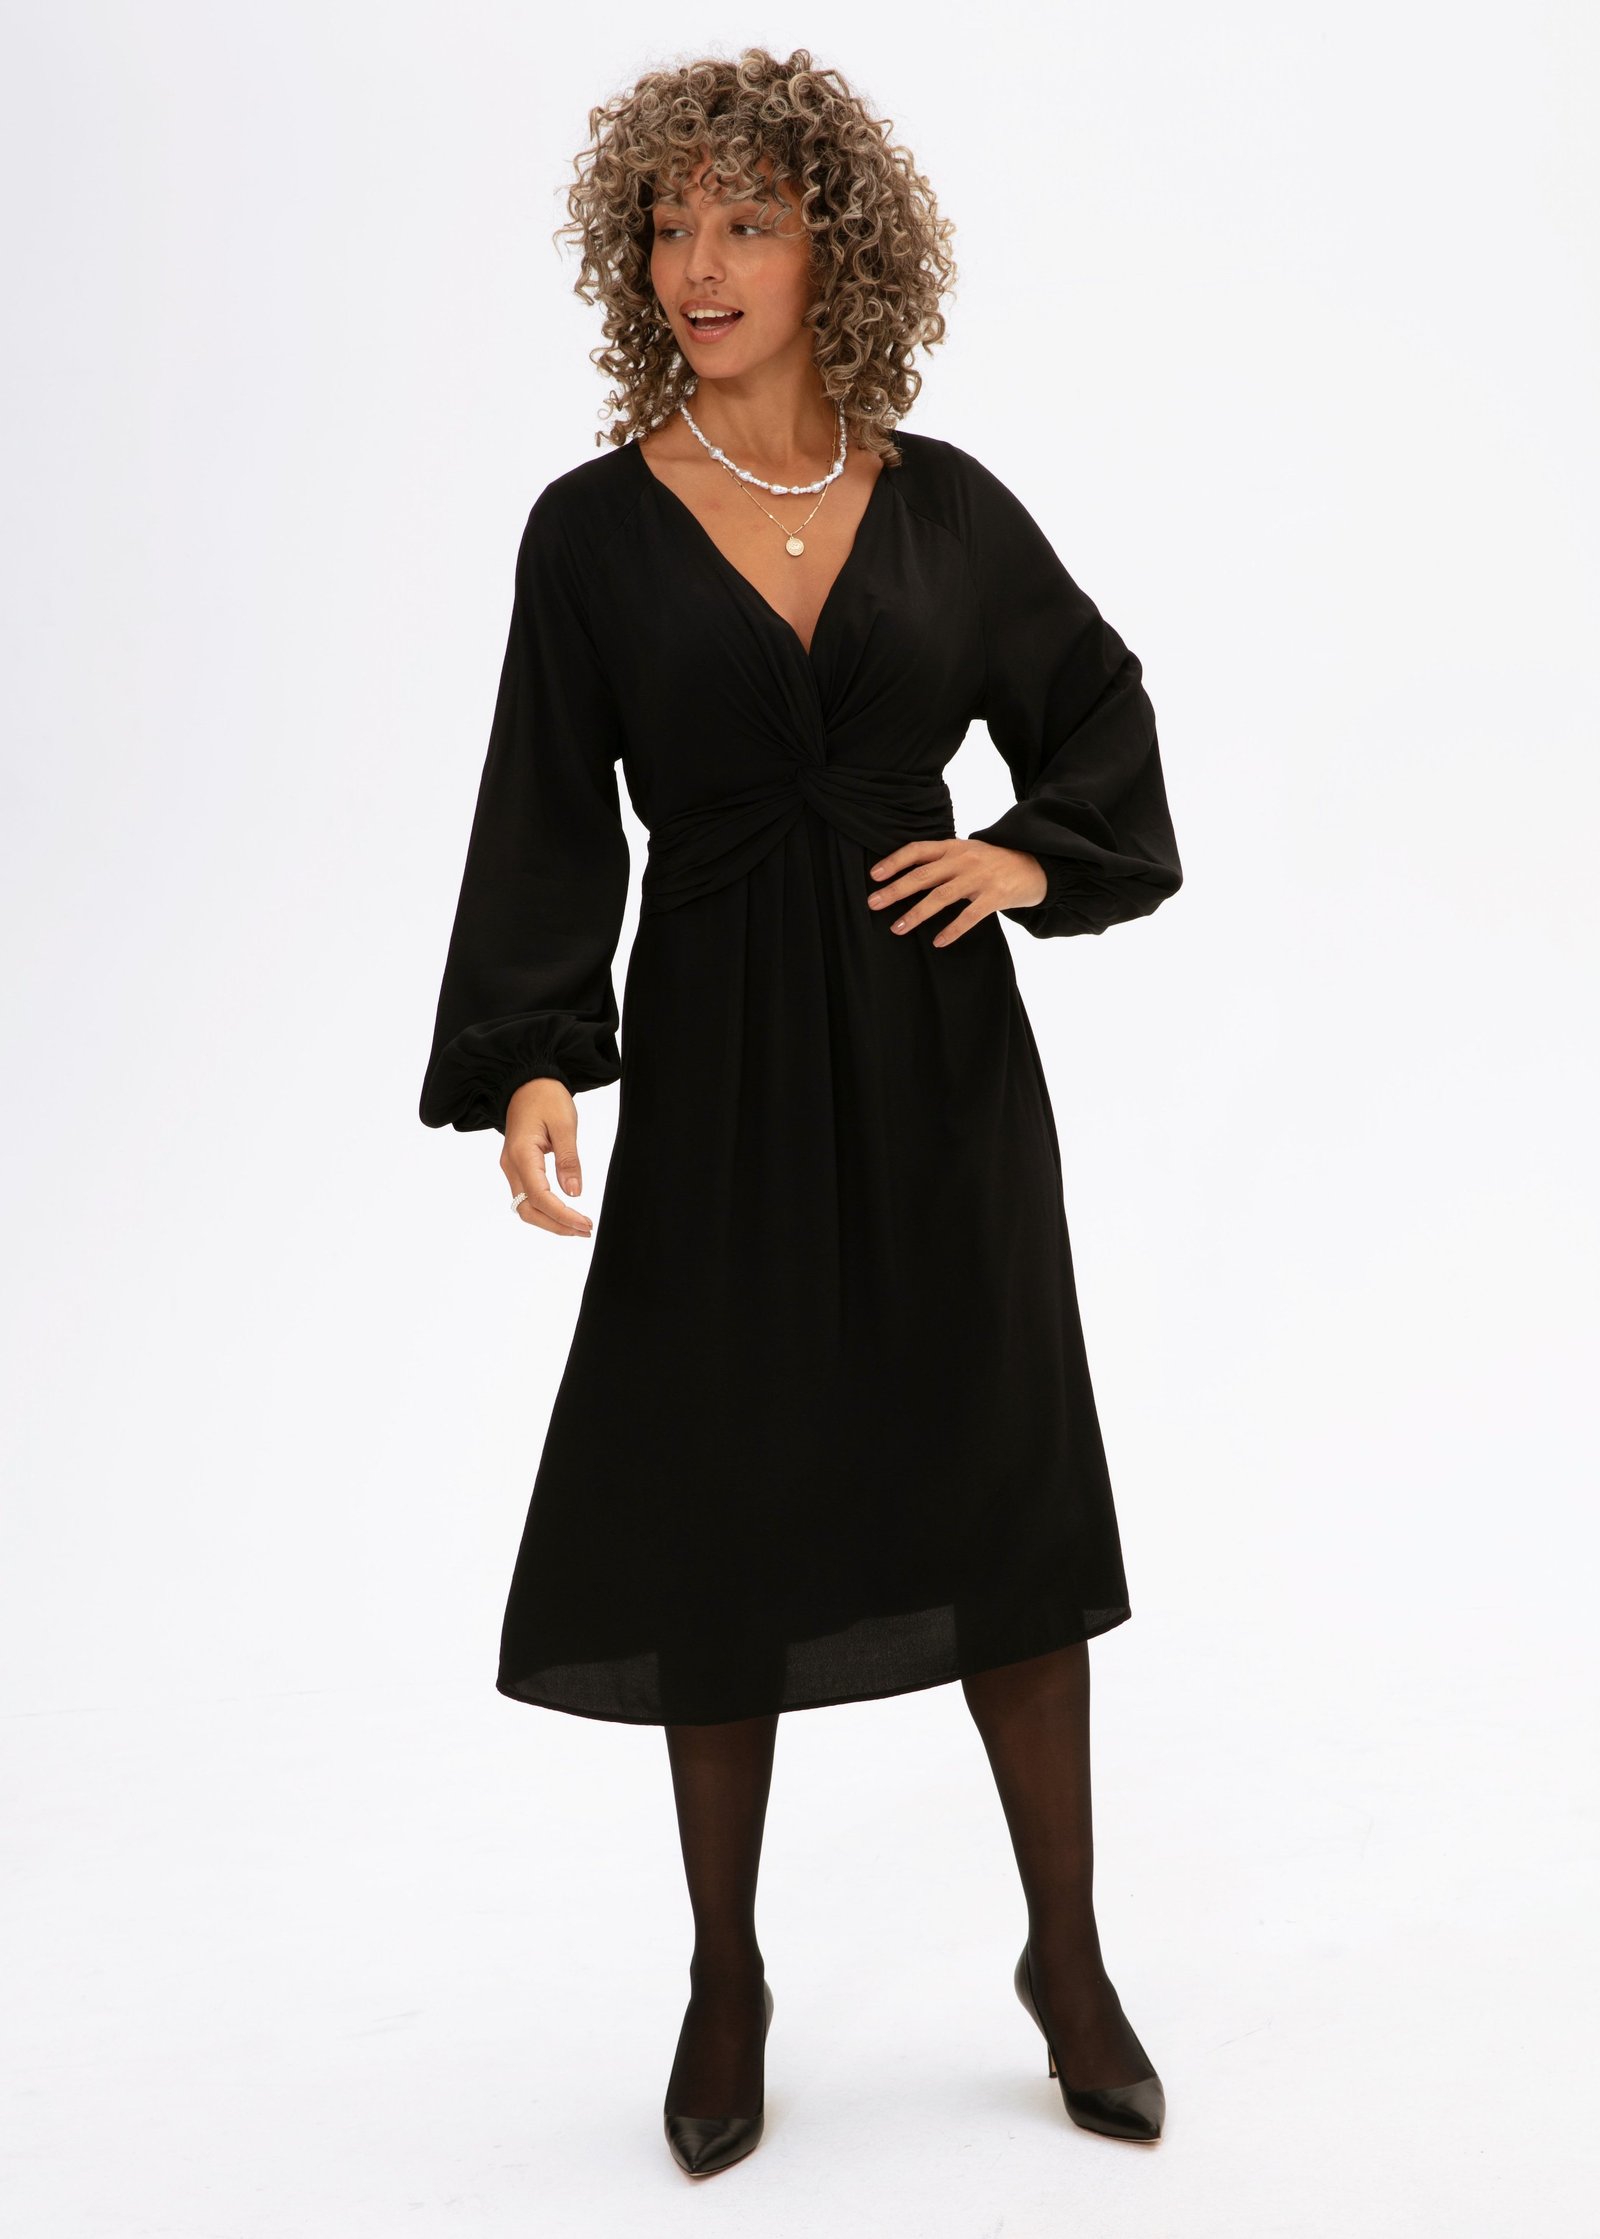 Black dress with puff sleeves Image 1